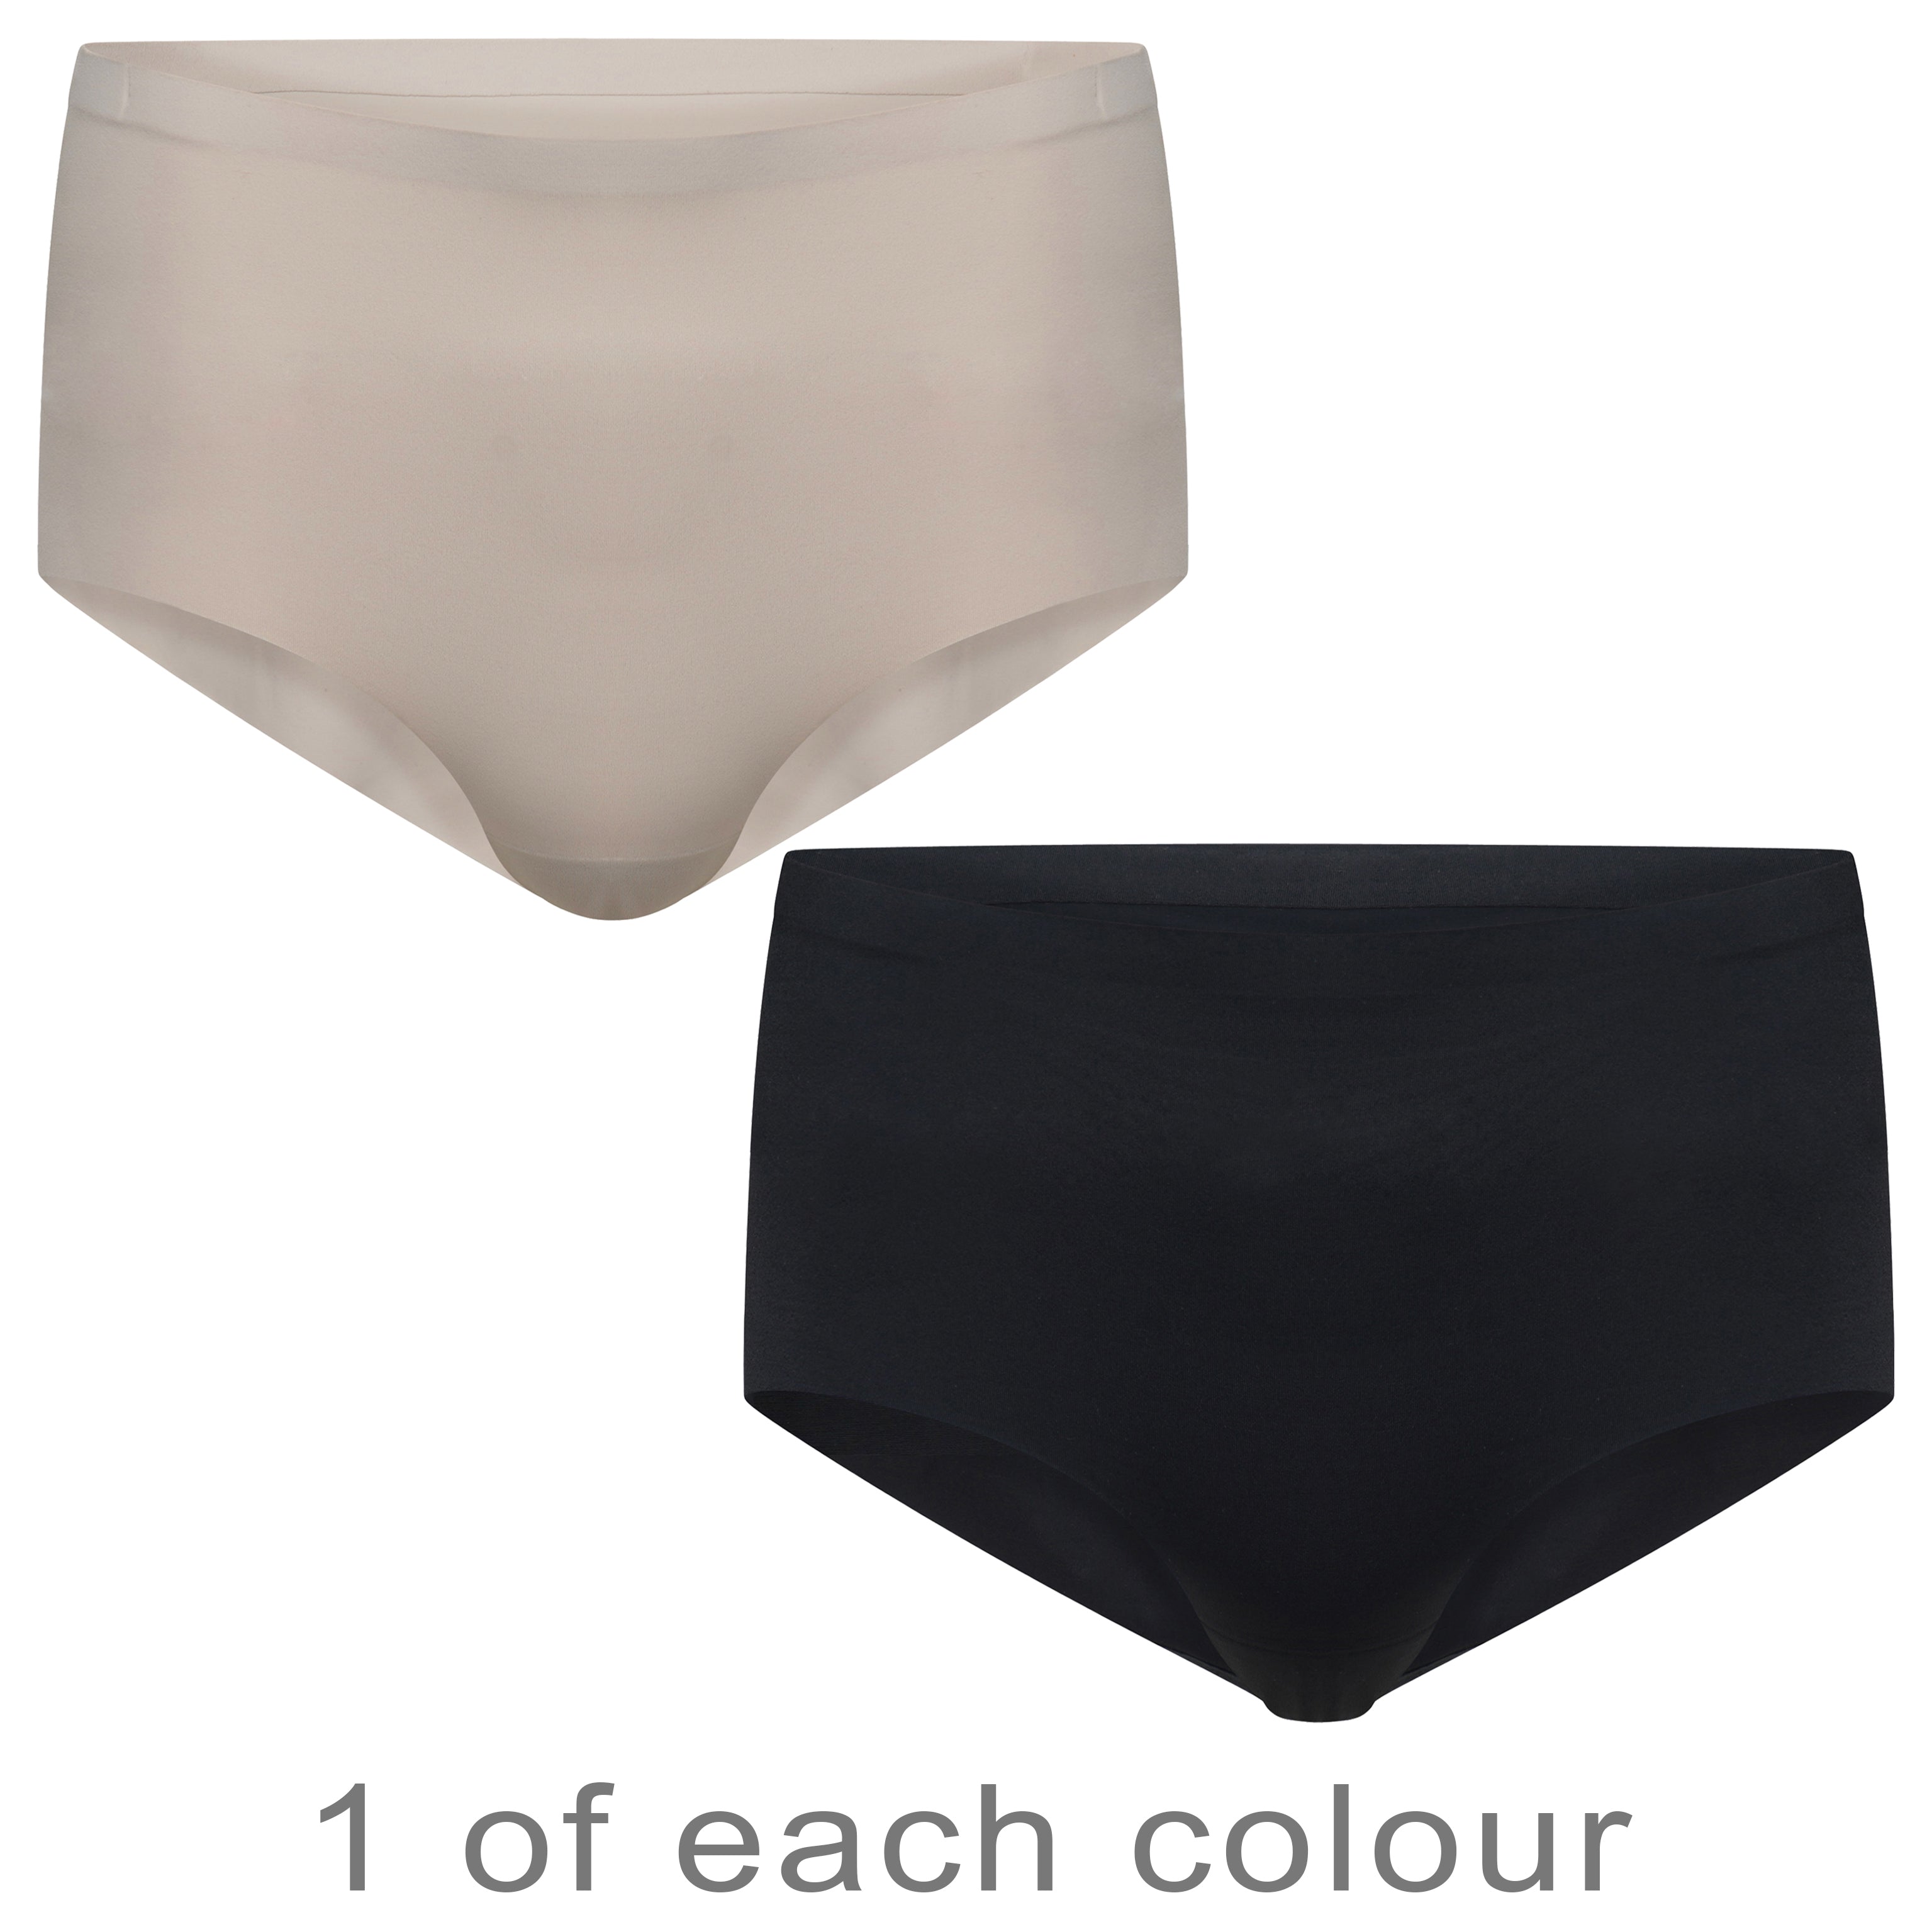 https://justforyouboutique.co.uk/cdn/shop/files/ladies-a-two-pack-of-1-black-and-1-nude-seamless-seamfree-no-vpl-knickers-briefs-in-uk-sizes-8-10-just-for-you-boutique.jpg?v=1695634218